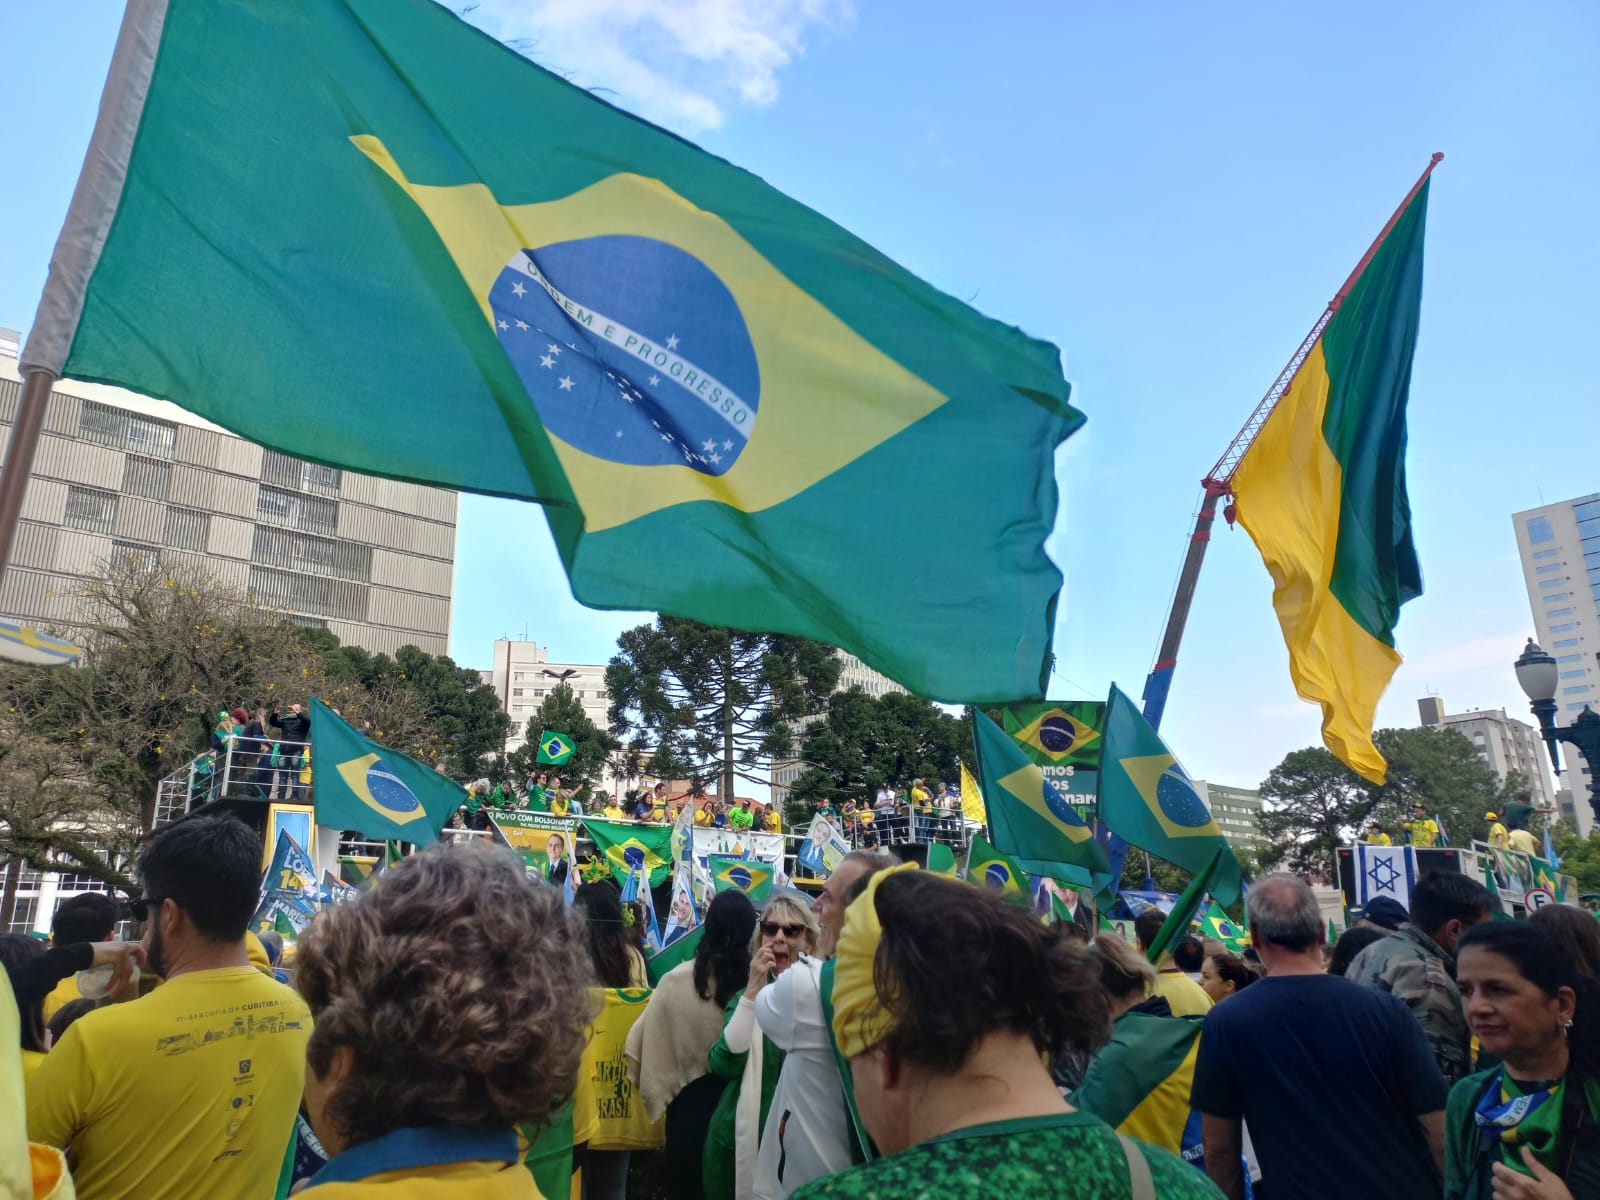 PR - Curitiba - 01/23/2021 - CURITIBA, CARRETA AGAINST THE BOLSONARO  GOVERNMENT - Vehicles are seen during a demonstration in front of the  Iguacu Palace in the city of Curitiba, this Saturday (